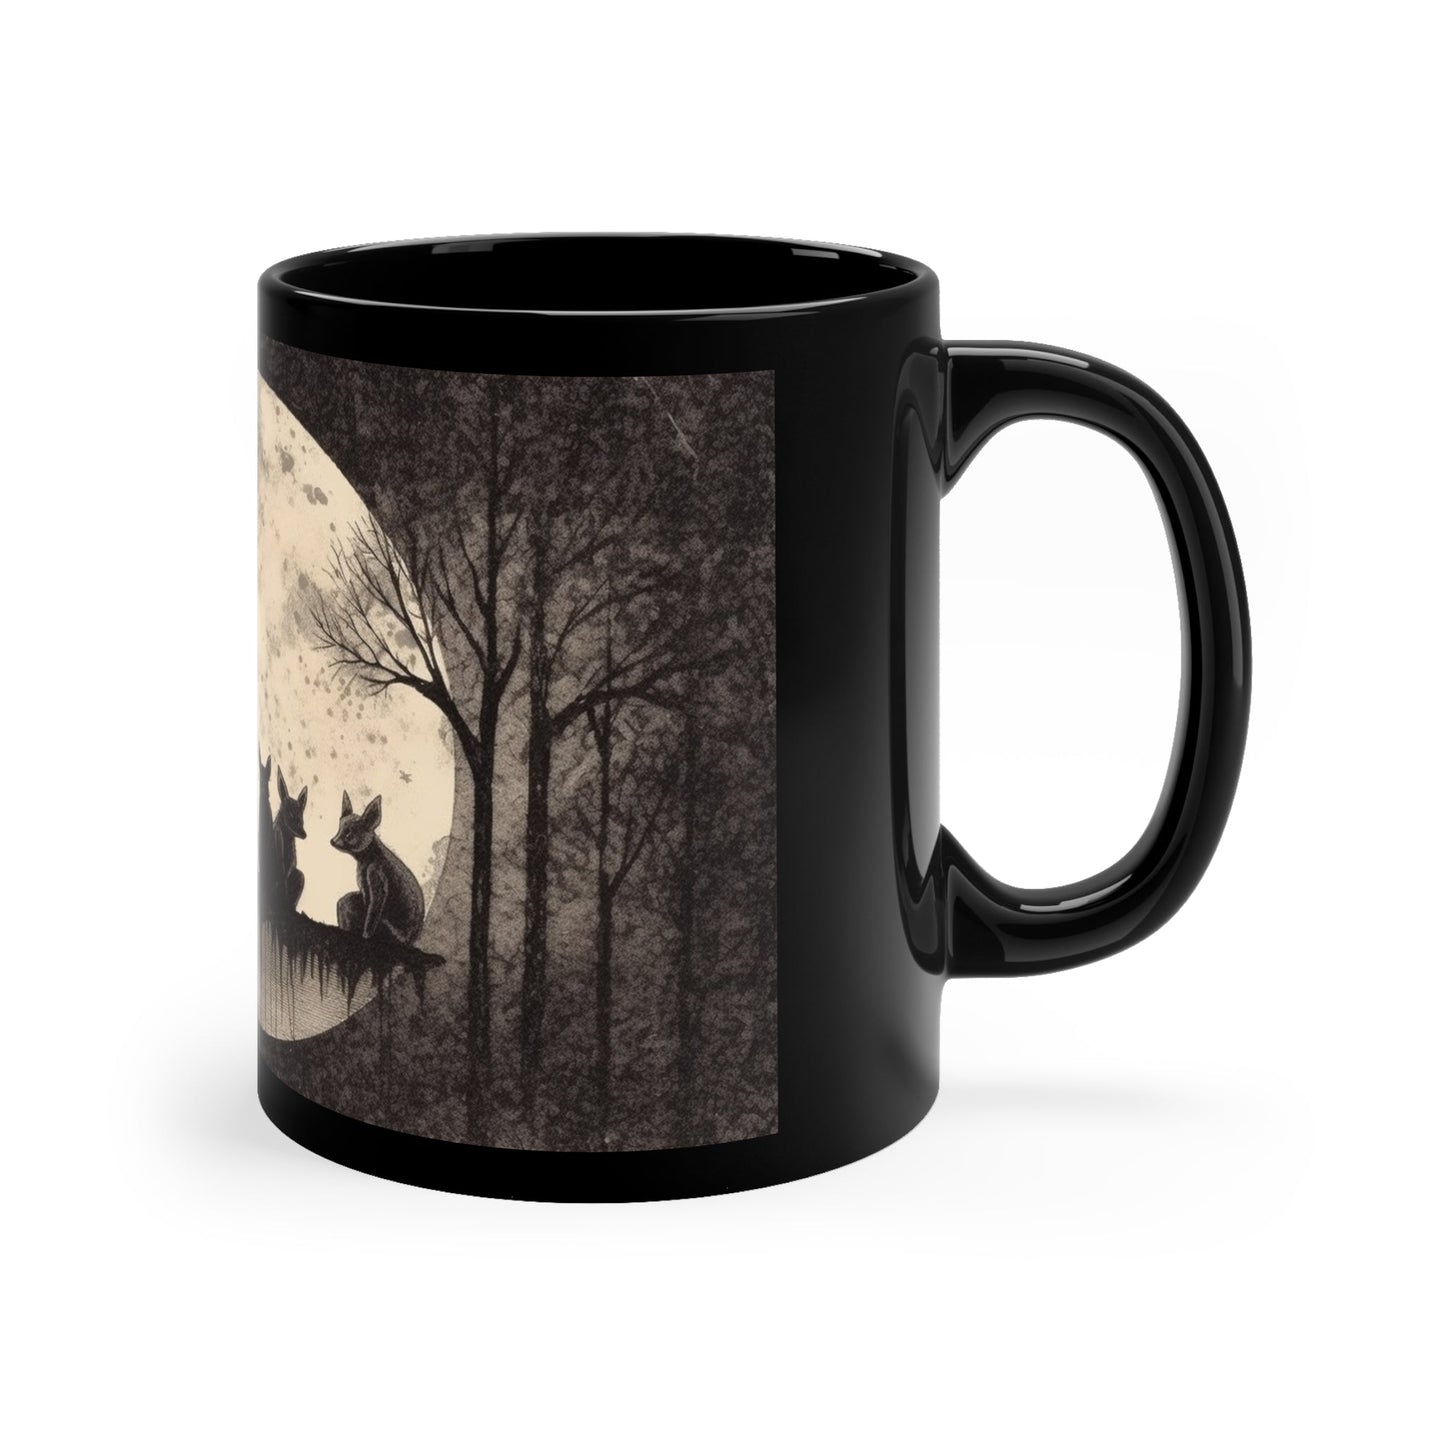 a black coffee mug with an illustration of foxes sitting in front of a full moon in a forest printed on it.